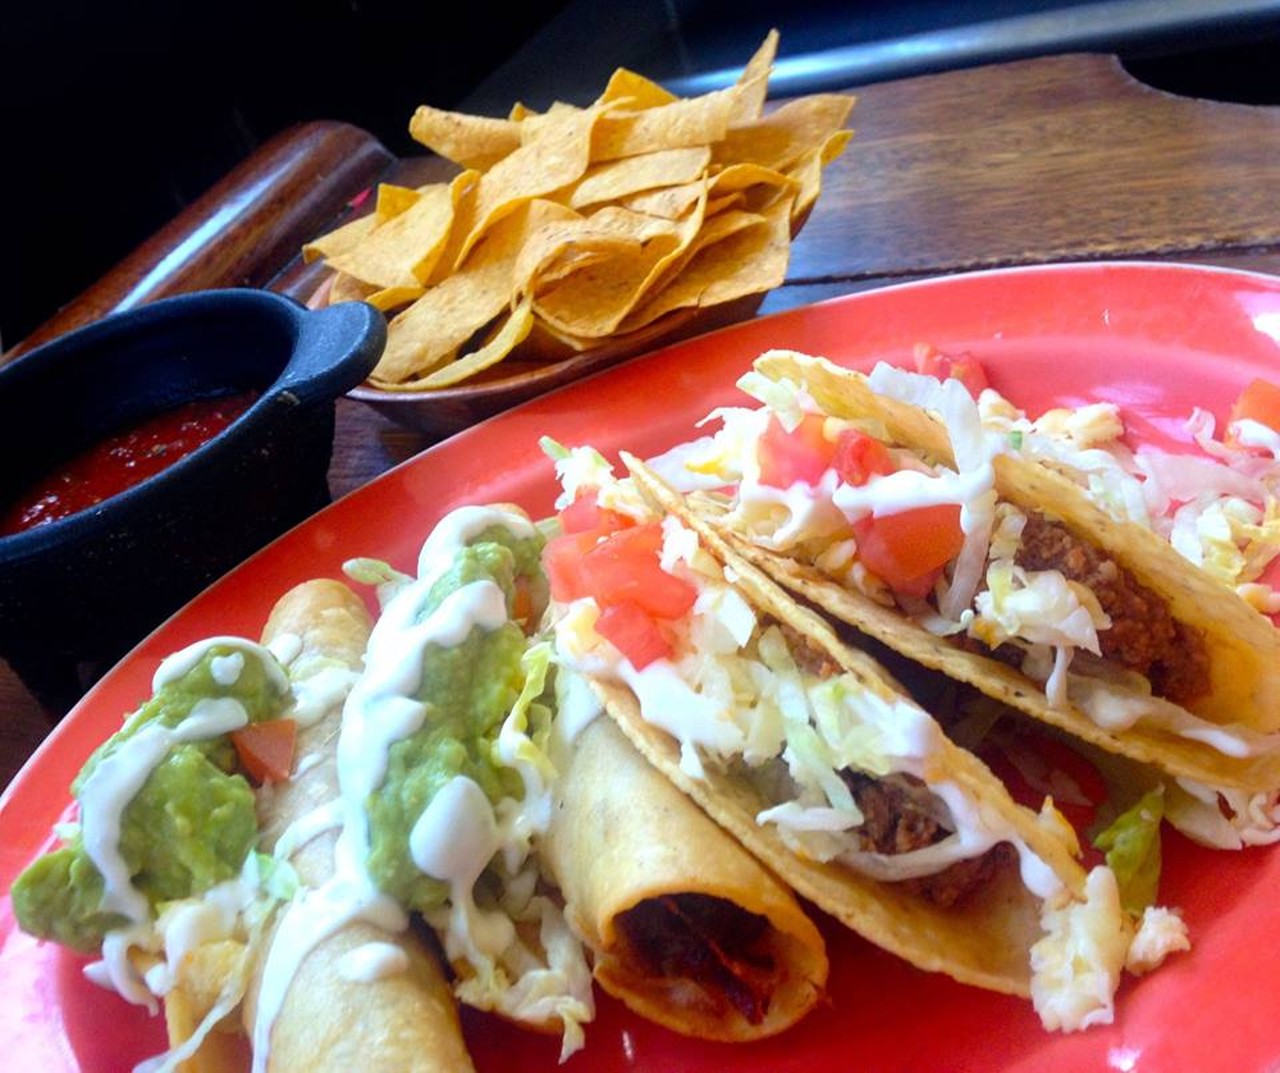 Mexican Food for Dine-In or Takeout at Luchita's (Up to 50% Off). Three Options Available.